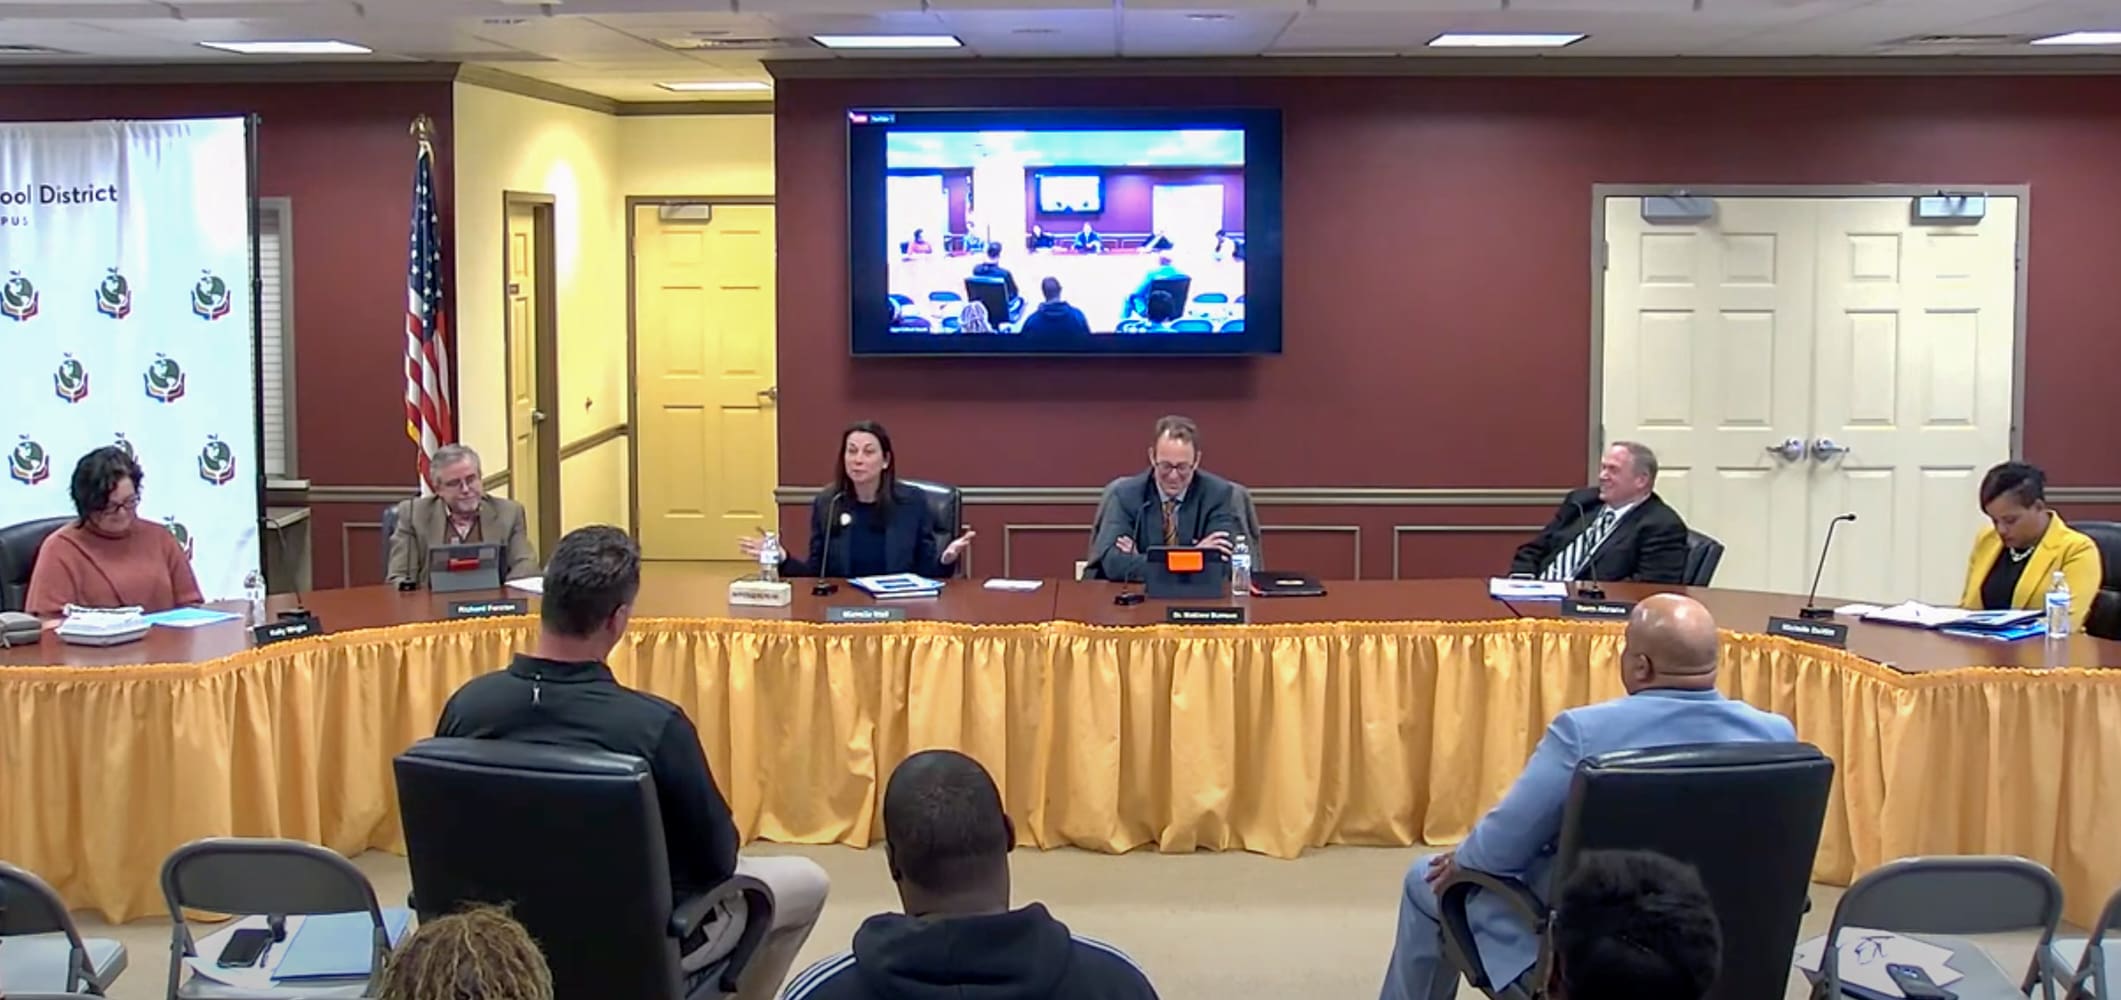 Featured image for “Only 2 of 4 Appo school board candidates attend board’s Q&A”